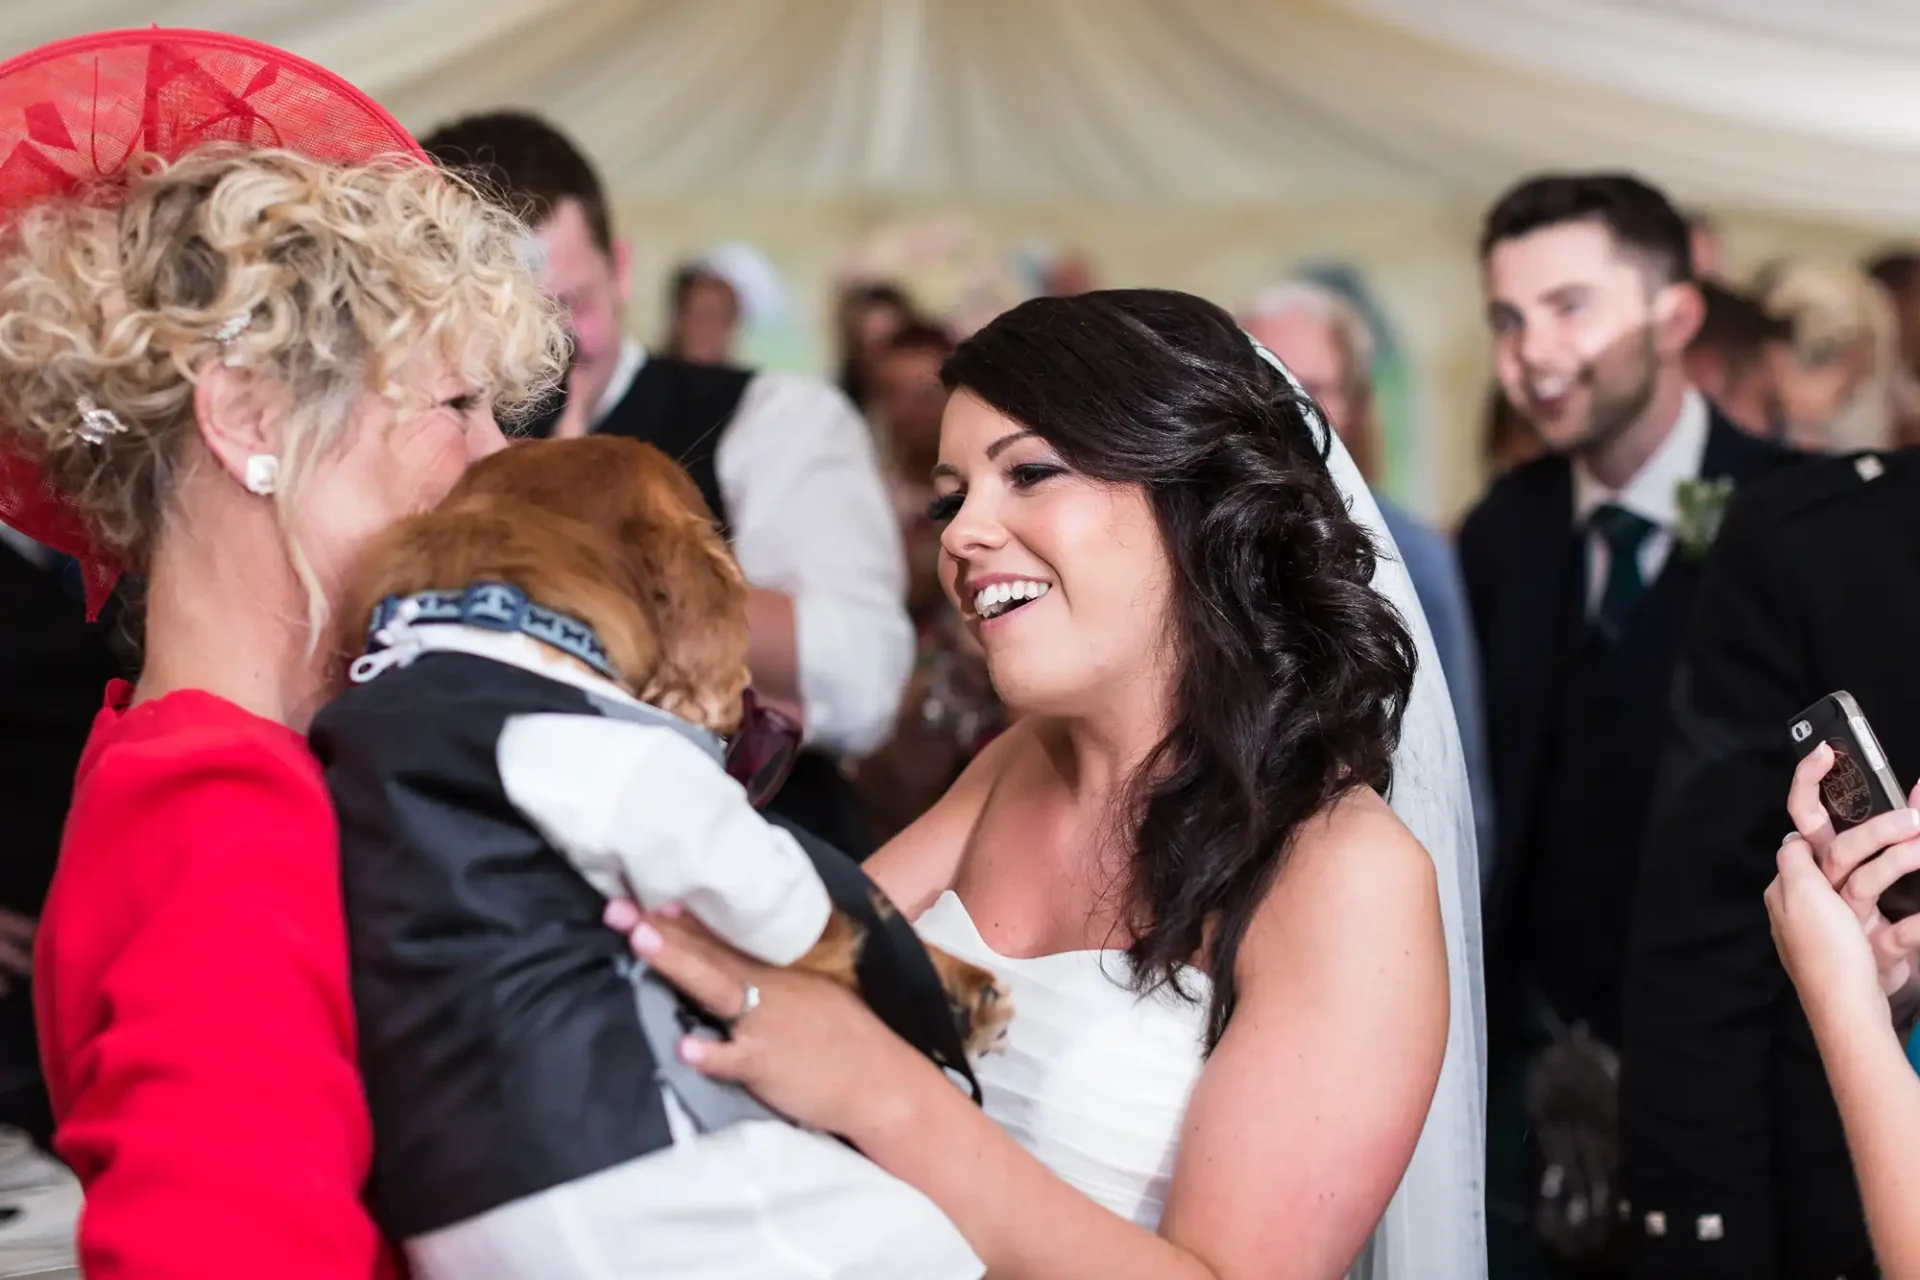 A bride smiles joyously as she receives a small dog from an older woman in a red hat at a wedding reception, while guests look on and capture the moment.